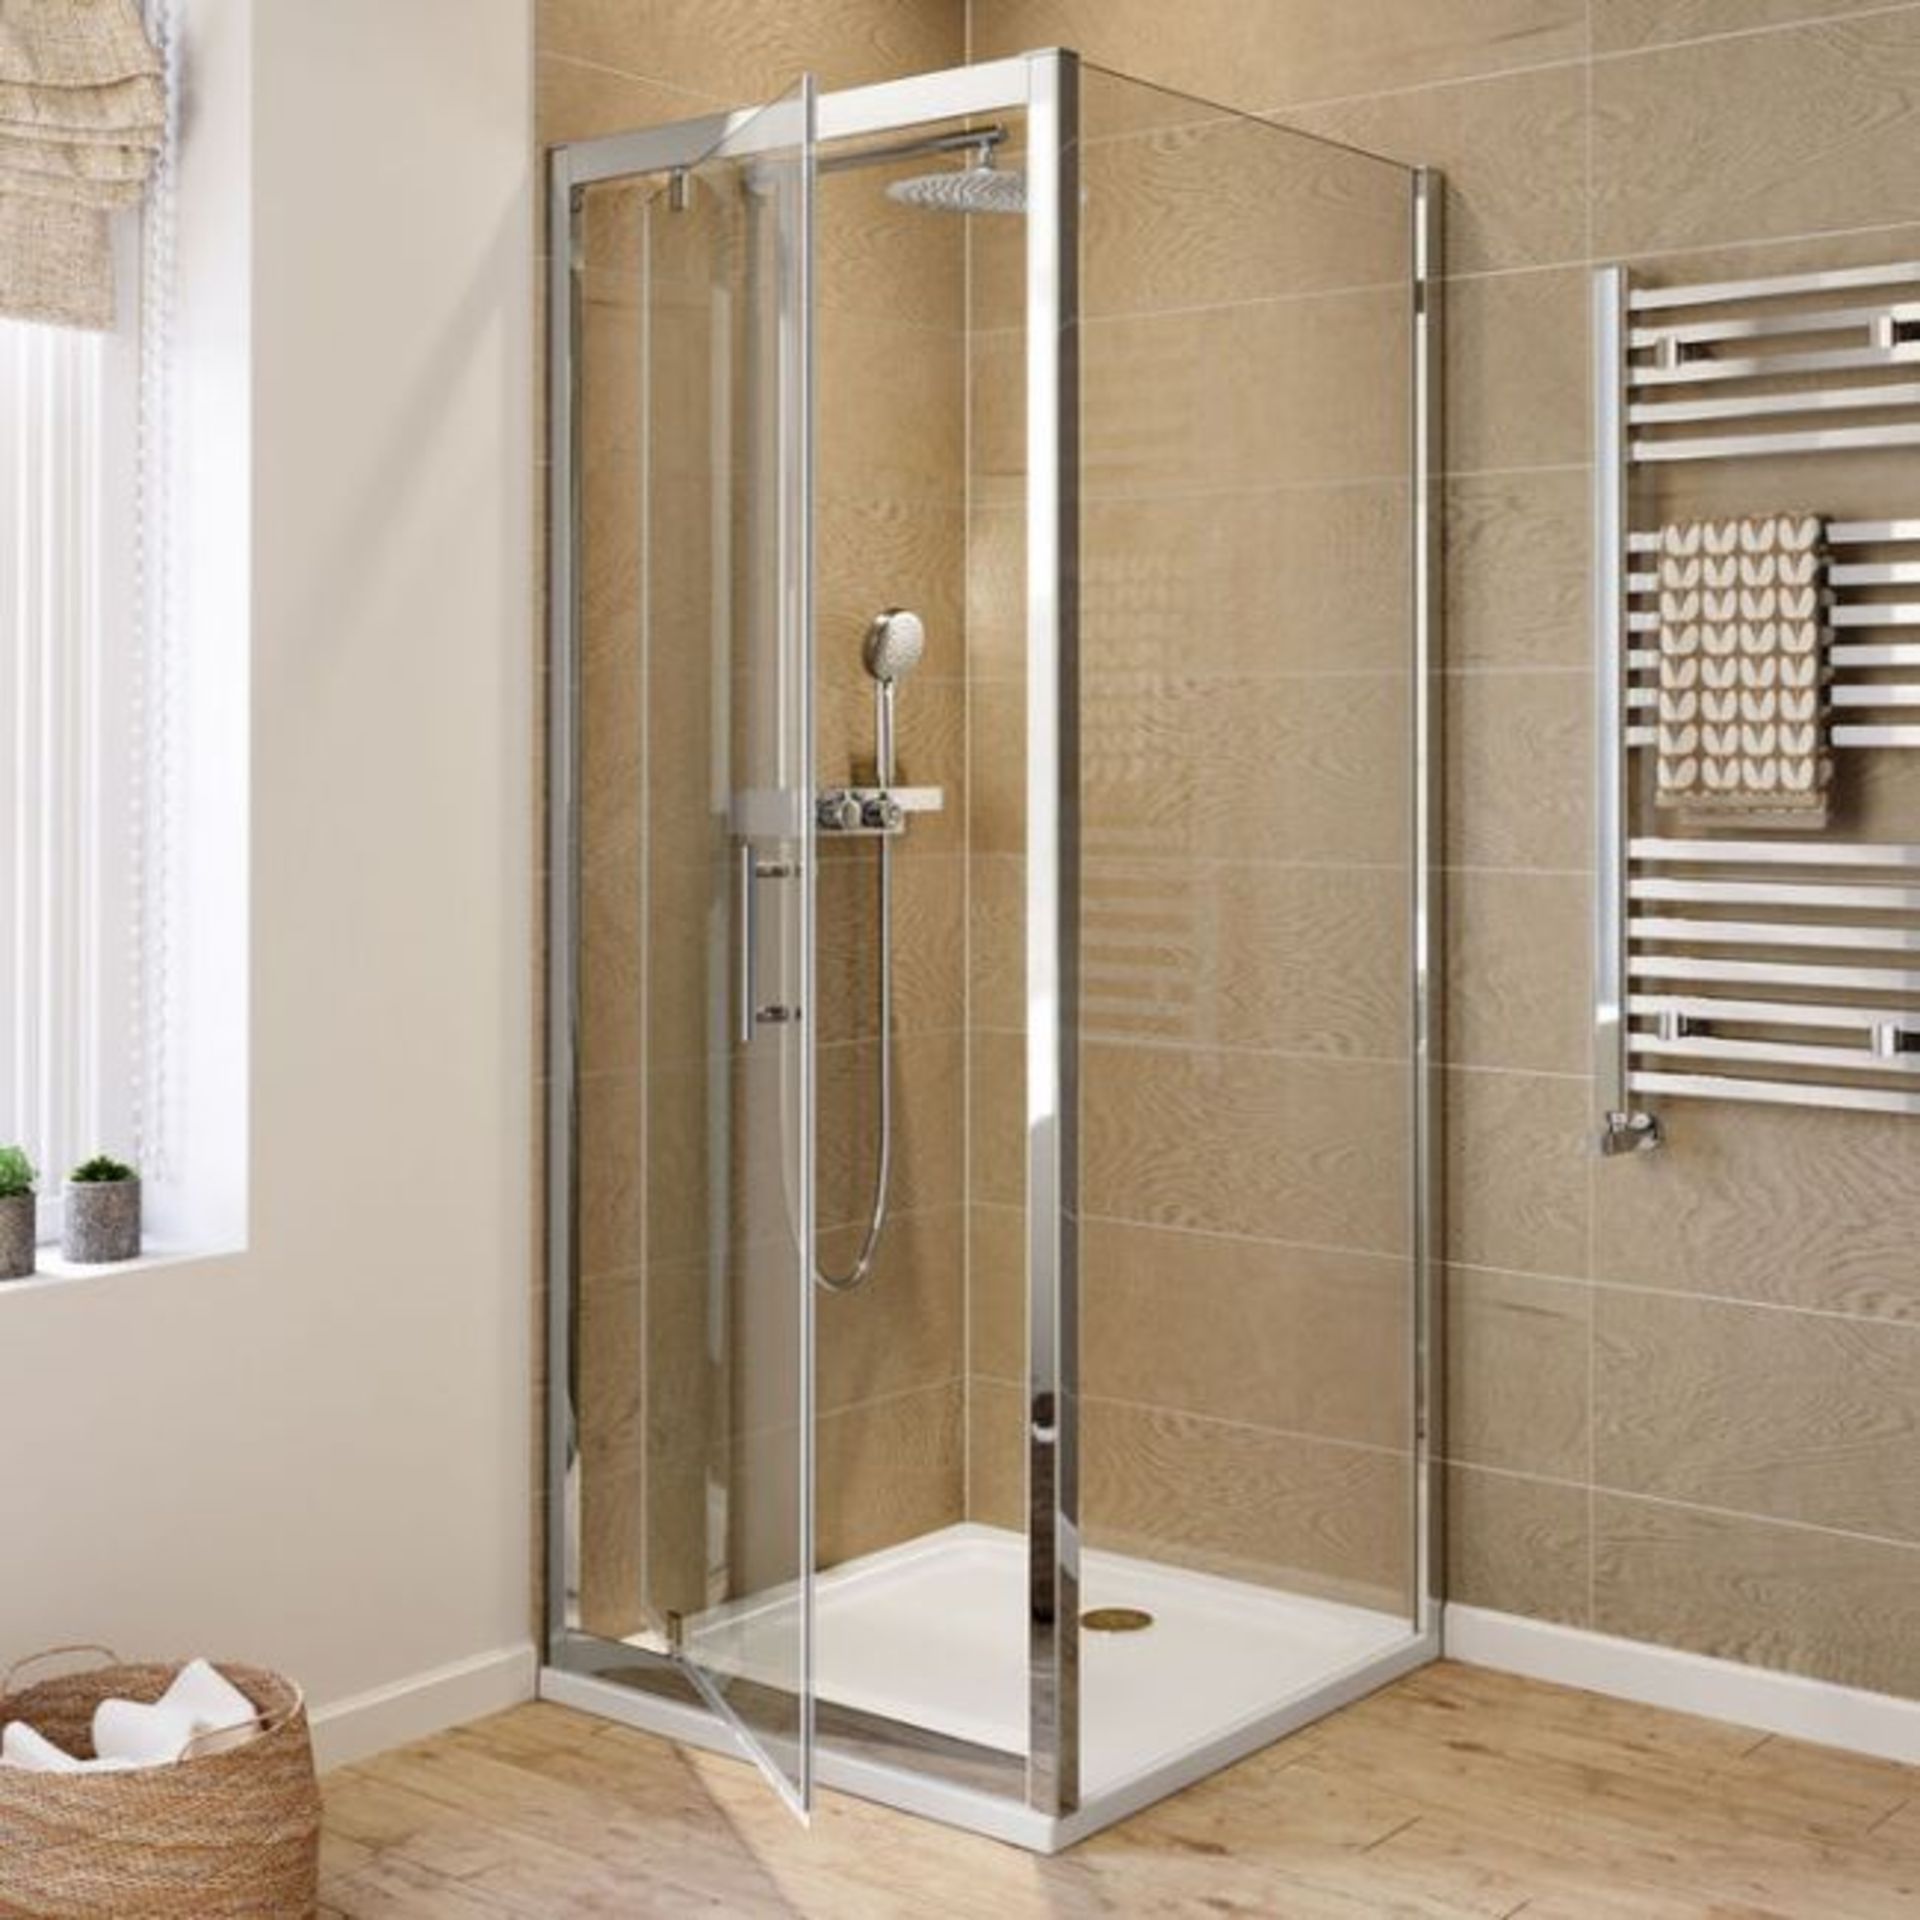 New 700x700 mm - 6 mm - Elements Pivot Door Shower Enclosure. RRP £330.99.6 mm Safety Glass Fully... - Image 2 of 2